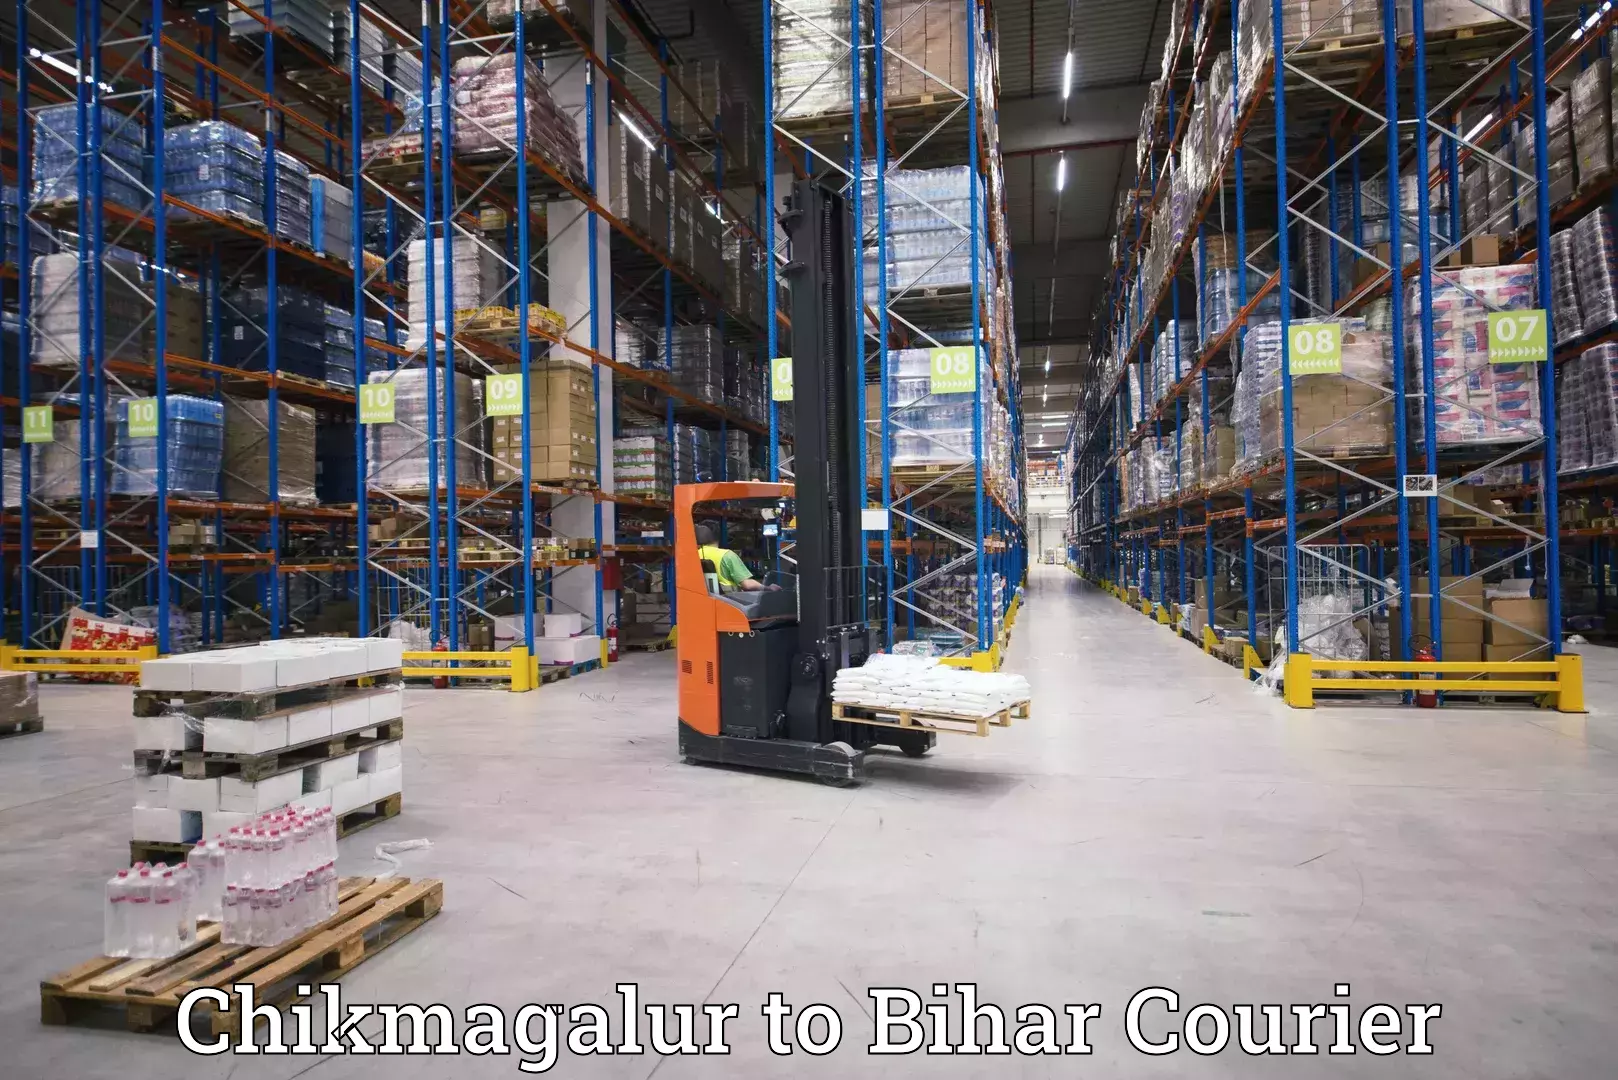 State-of-the-art courier technology Chikmagalur to Fatwah